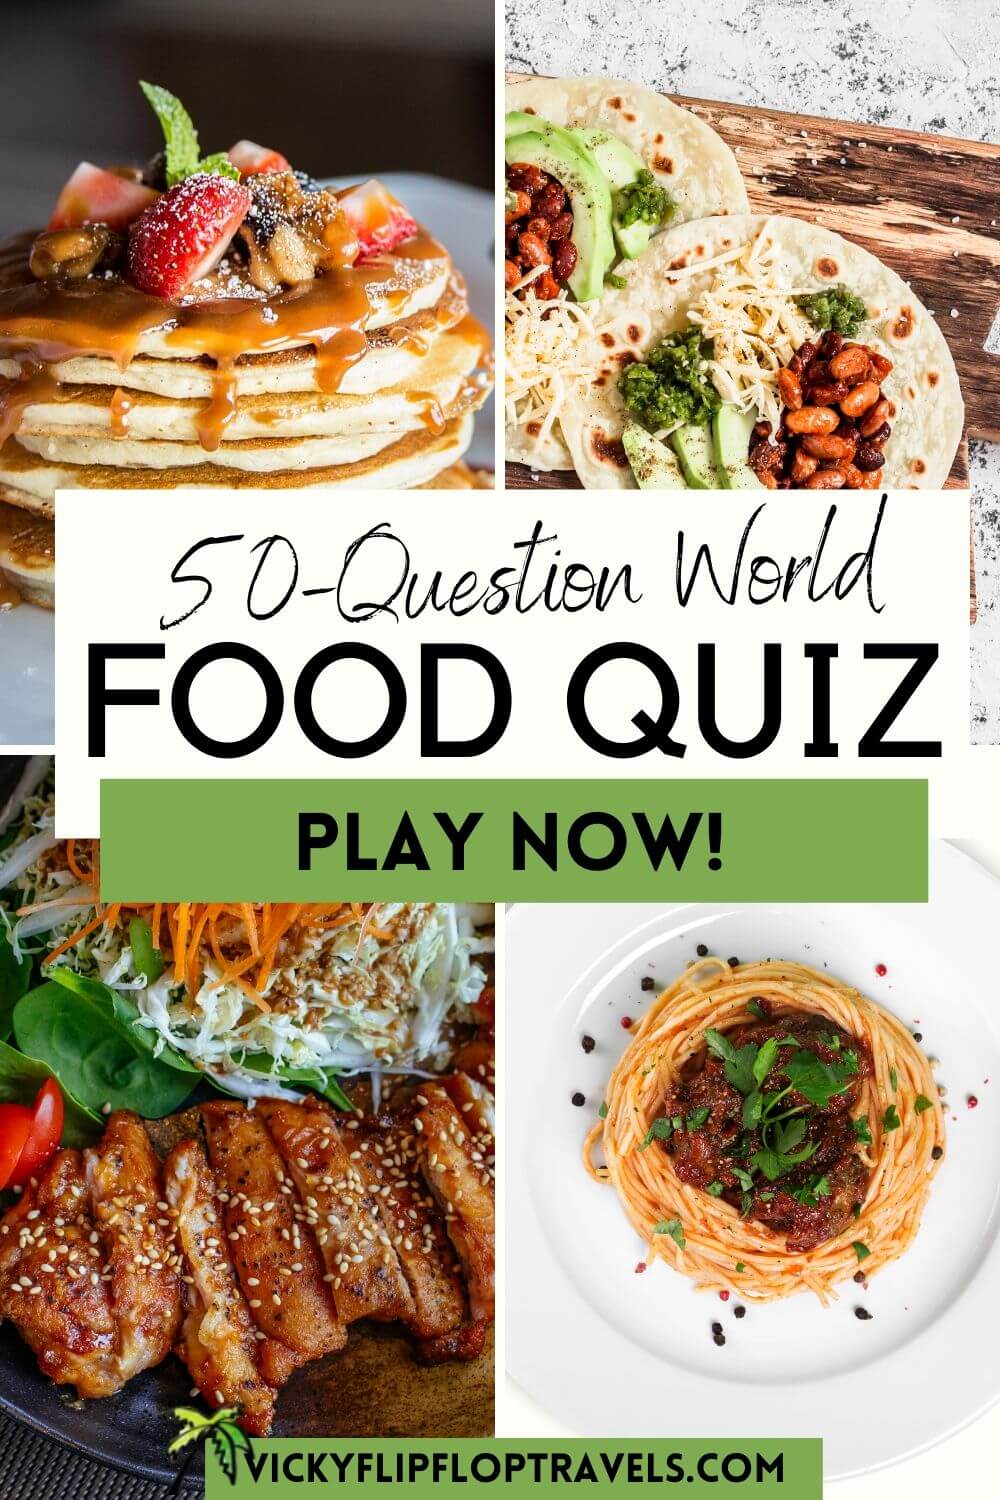 50 Great World Food Quiz Questions and Answers!